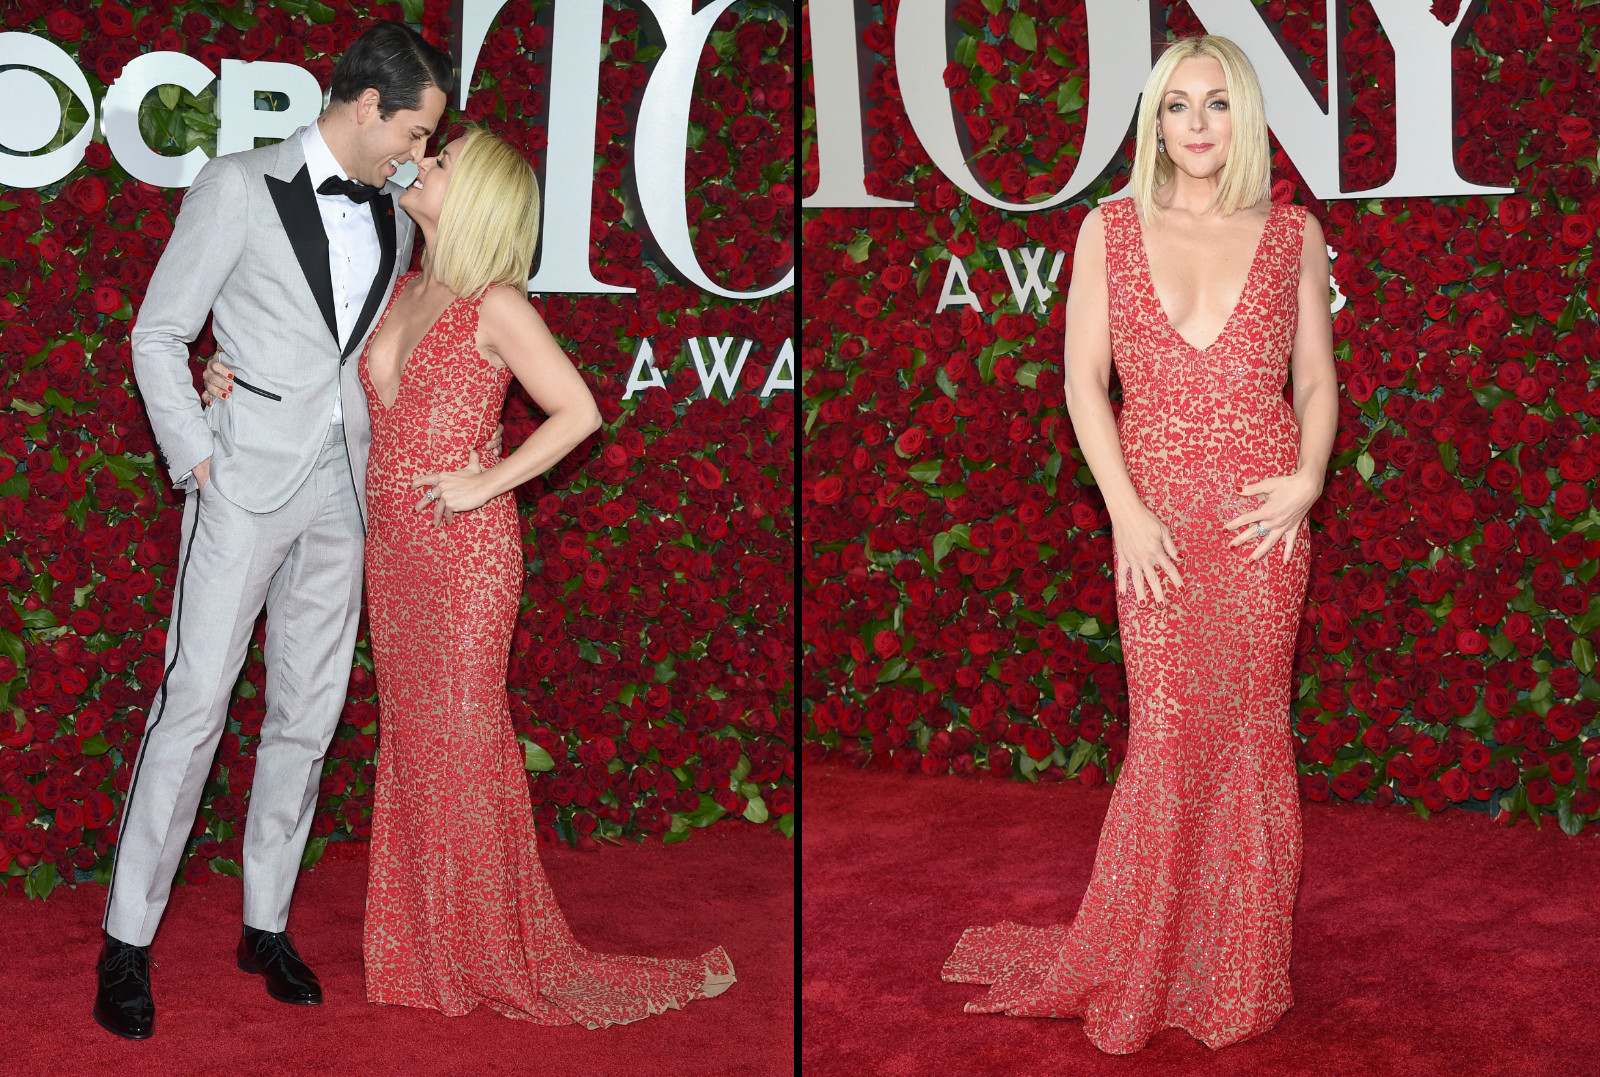 Jane Krakowski is another red carpet standout in red. (Charles Sykes / Invision / Associated Press)